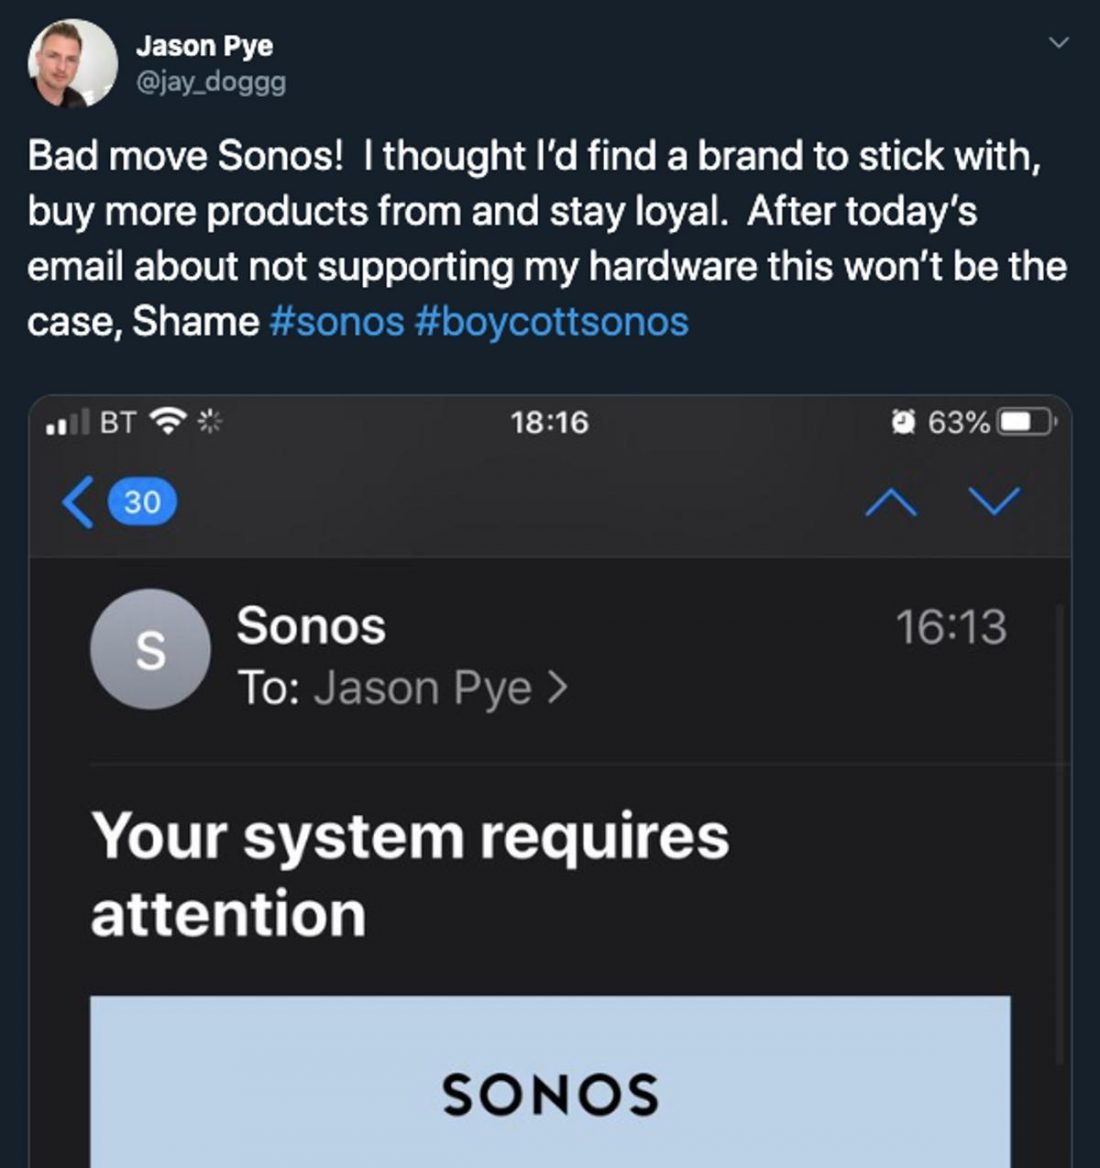 Sonos loses scores of customers, as shown in Tweets with the hashtag 